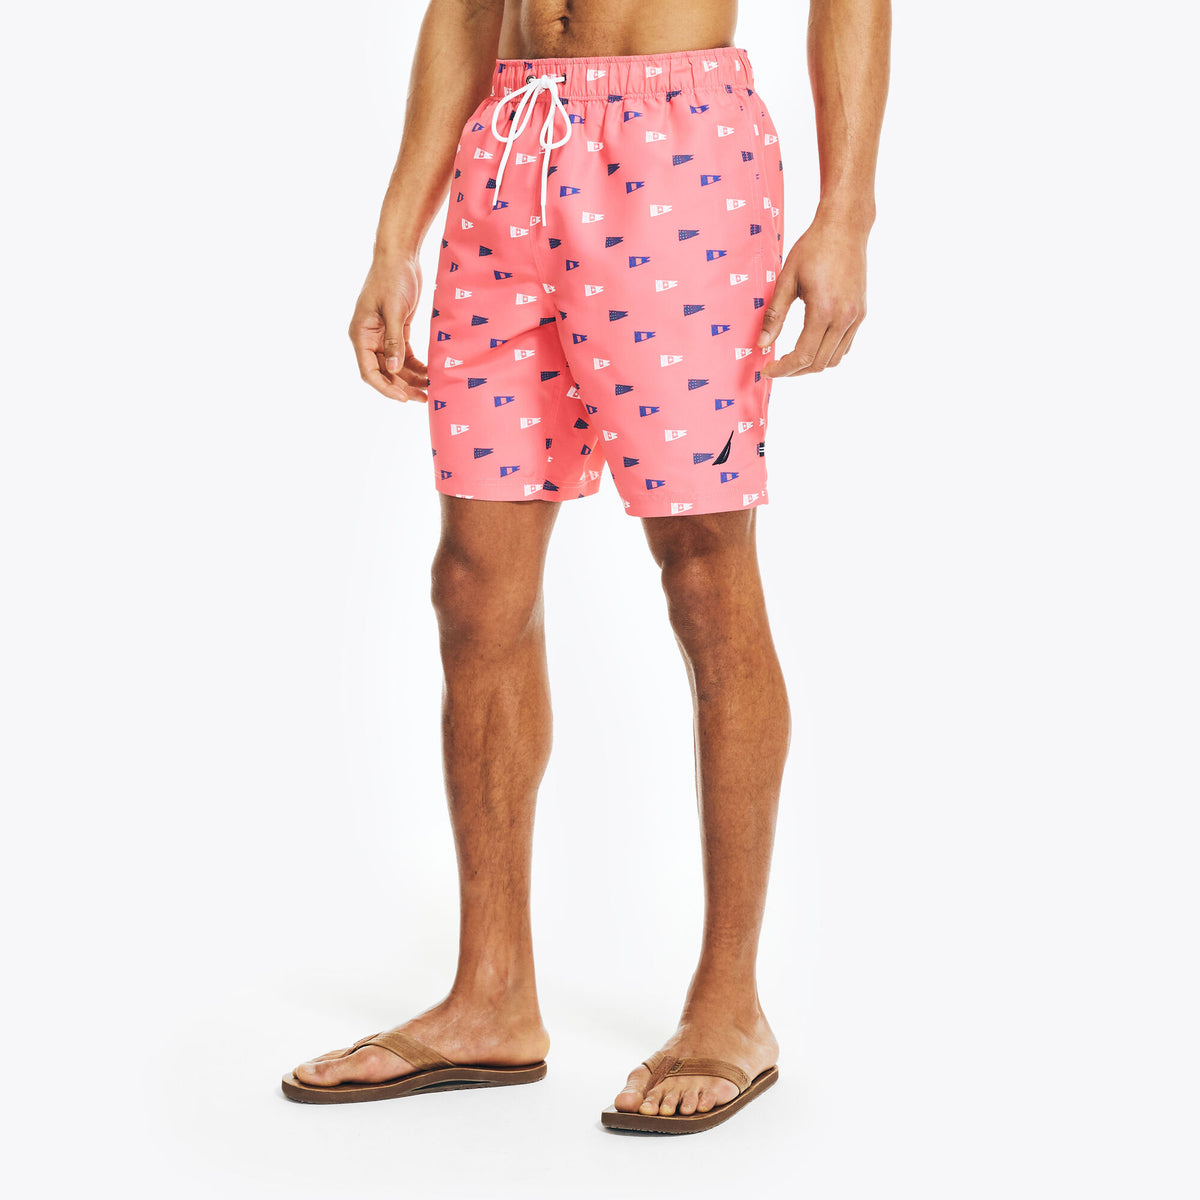 Nautica Men's Sustainably Crafted 8" Flag Print Swim Teaberry